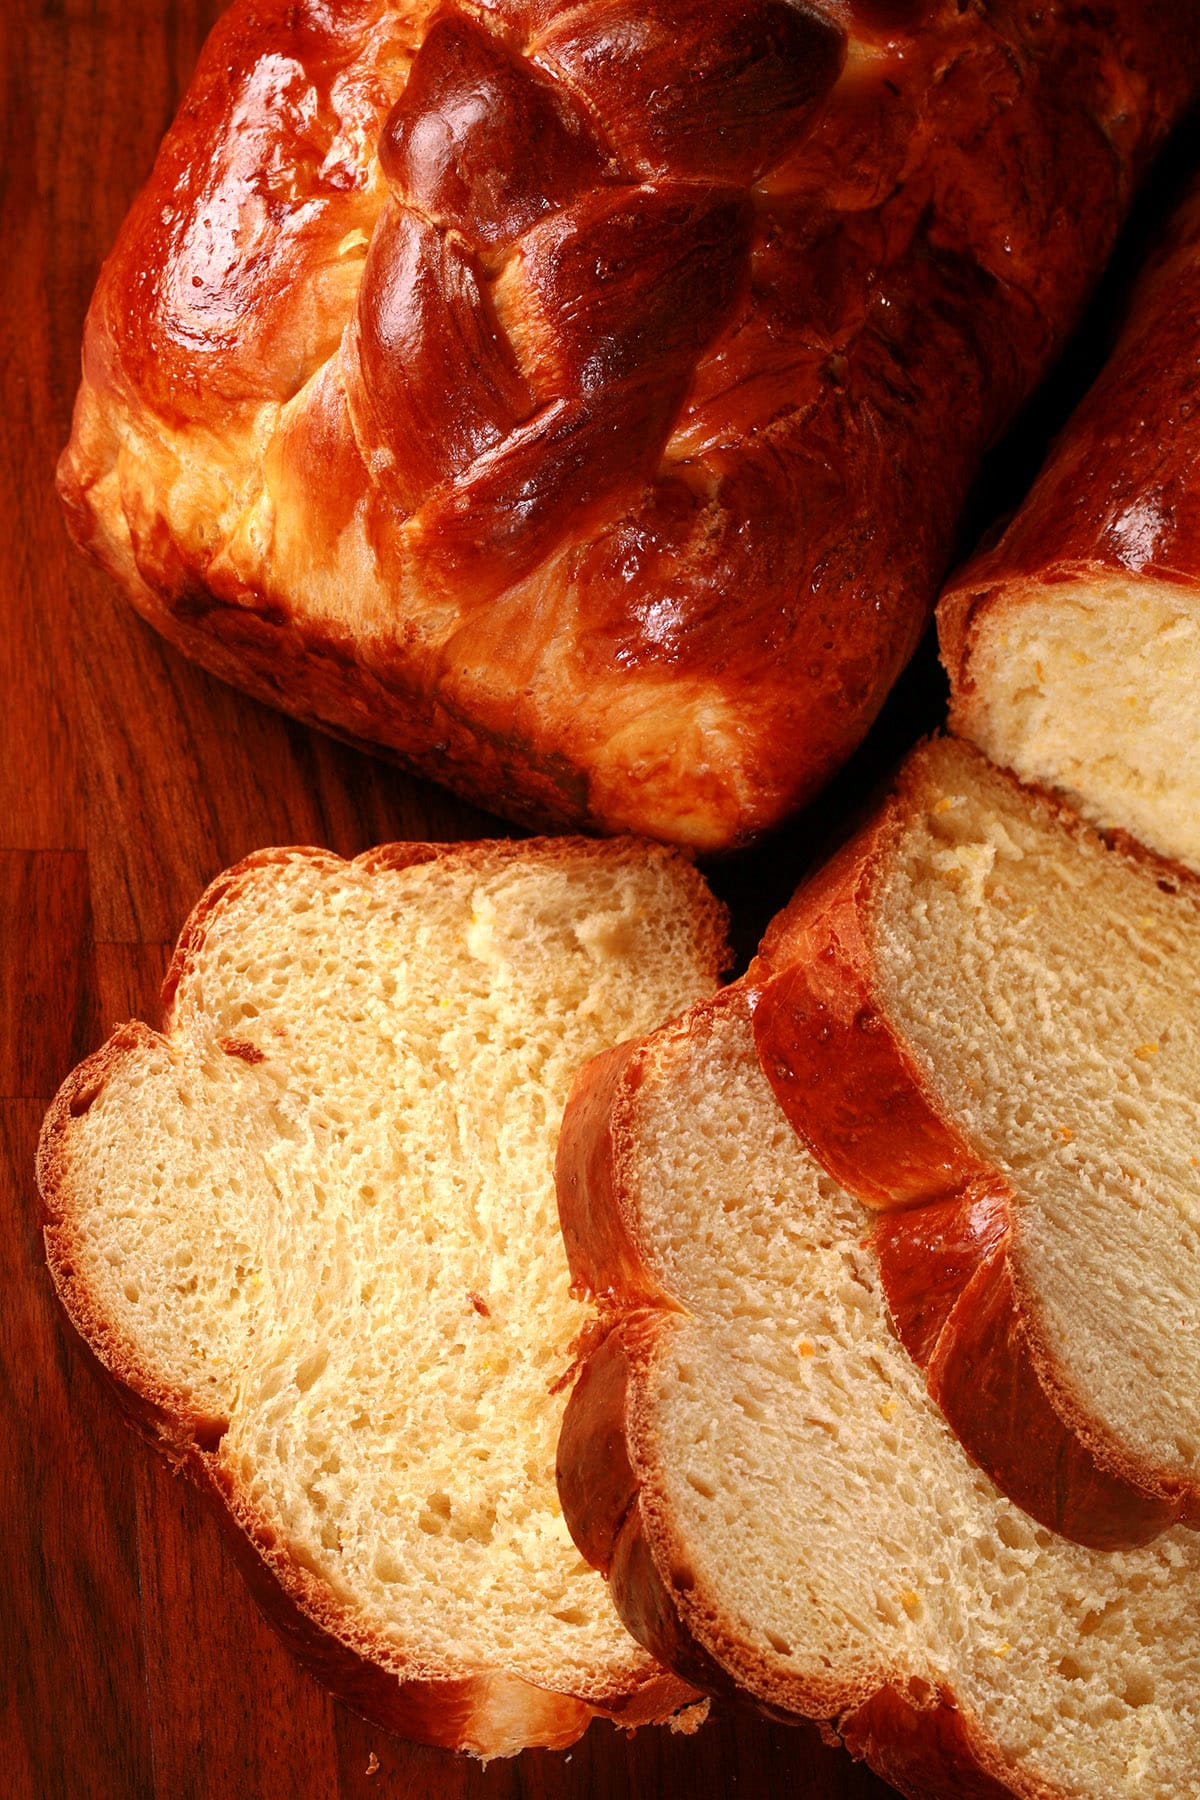 A sliced loaf of Ukrainian Easter bread, in front of another whole loaf of it.